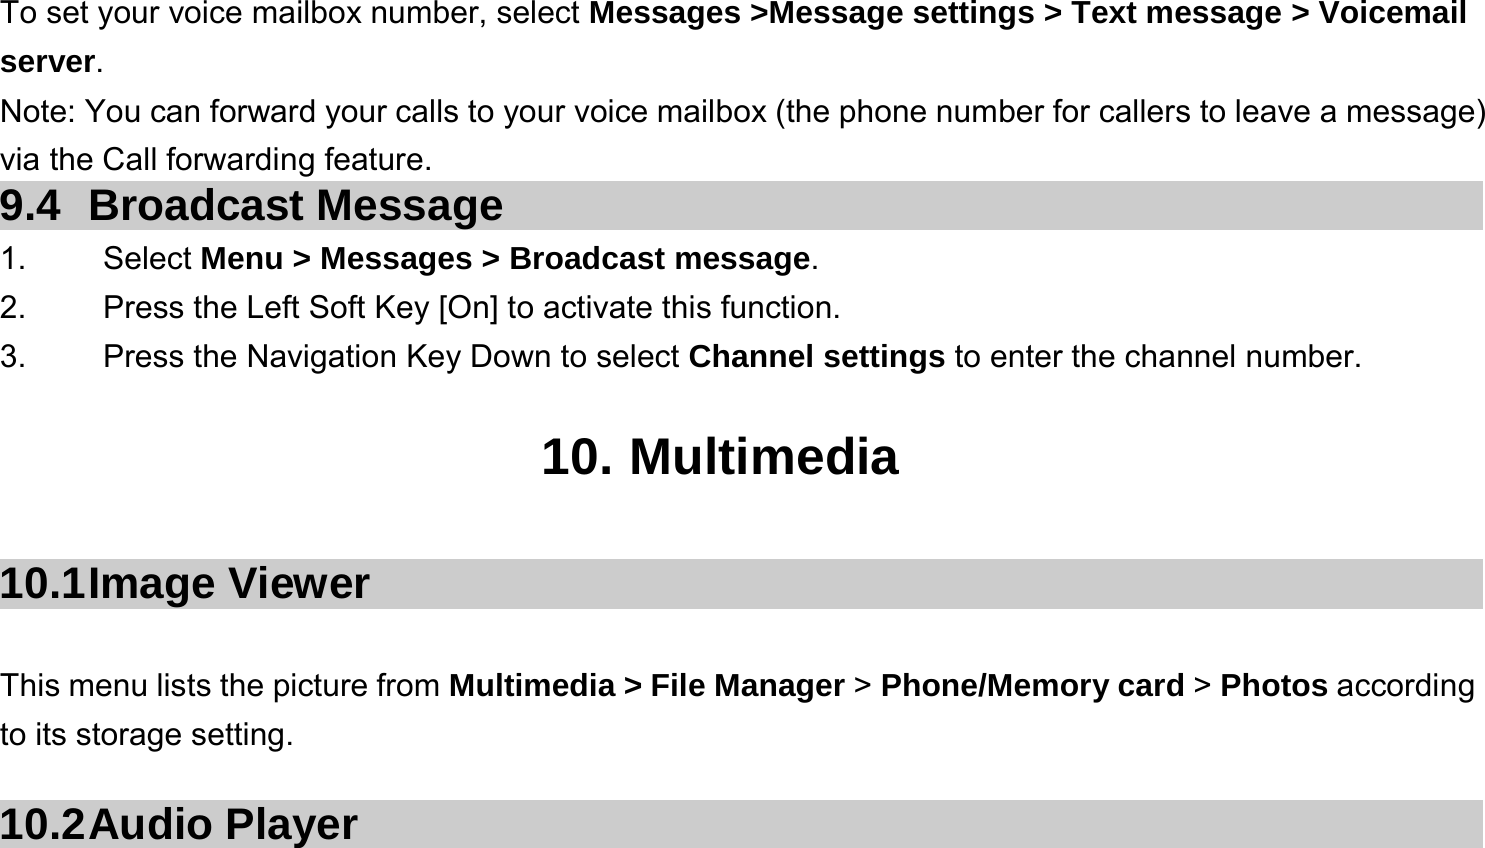  To set your voice mailbox number, select Messages &gt;Message settings &gt; Text message &gt; Voicemail server. Note: You can forward your calls to your voice mailbox (the phone number for callers to leave a message) via the Call forwarding feature. 9.4 Broadcast Message 1.   Select Menu &gt; Messages &gt; Broadcast message. 2.  Press the Left Soft Key [On] to activate this function. 3.  Press the Navigation Key Down to select Channel settings to enter the channel number.  10. Multimedia  10.1 Image  Viewer  This menu lists the picture from Multimedia &gt; File Manager &gt; Phone/Memory card &gt; Photos according to its storage setting.    10.2 Audio  Player 